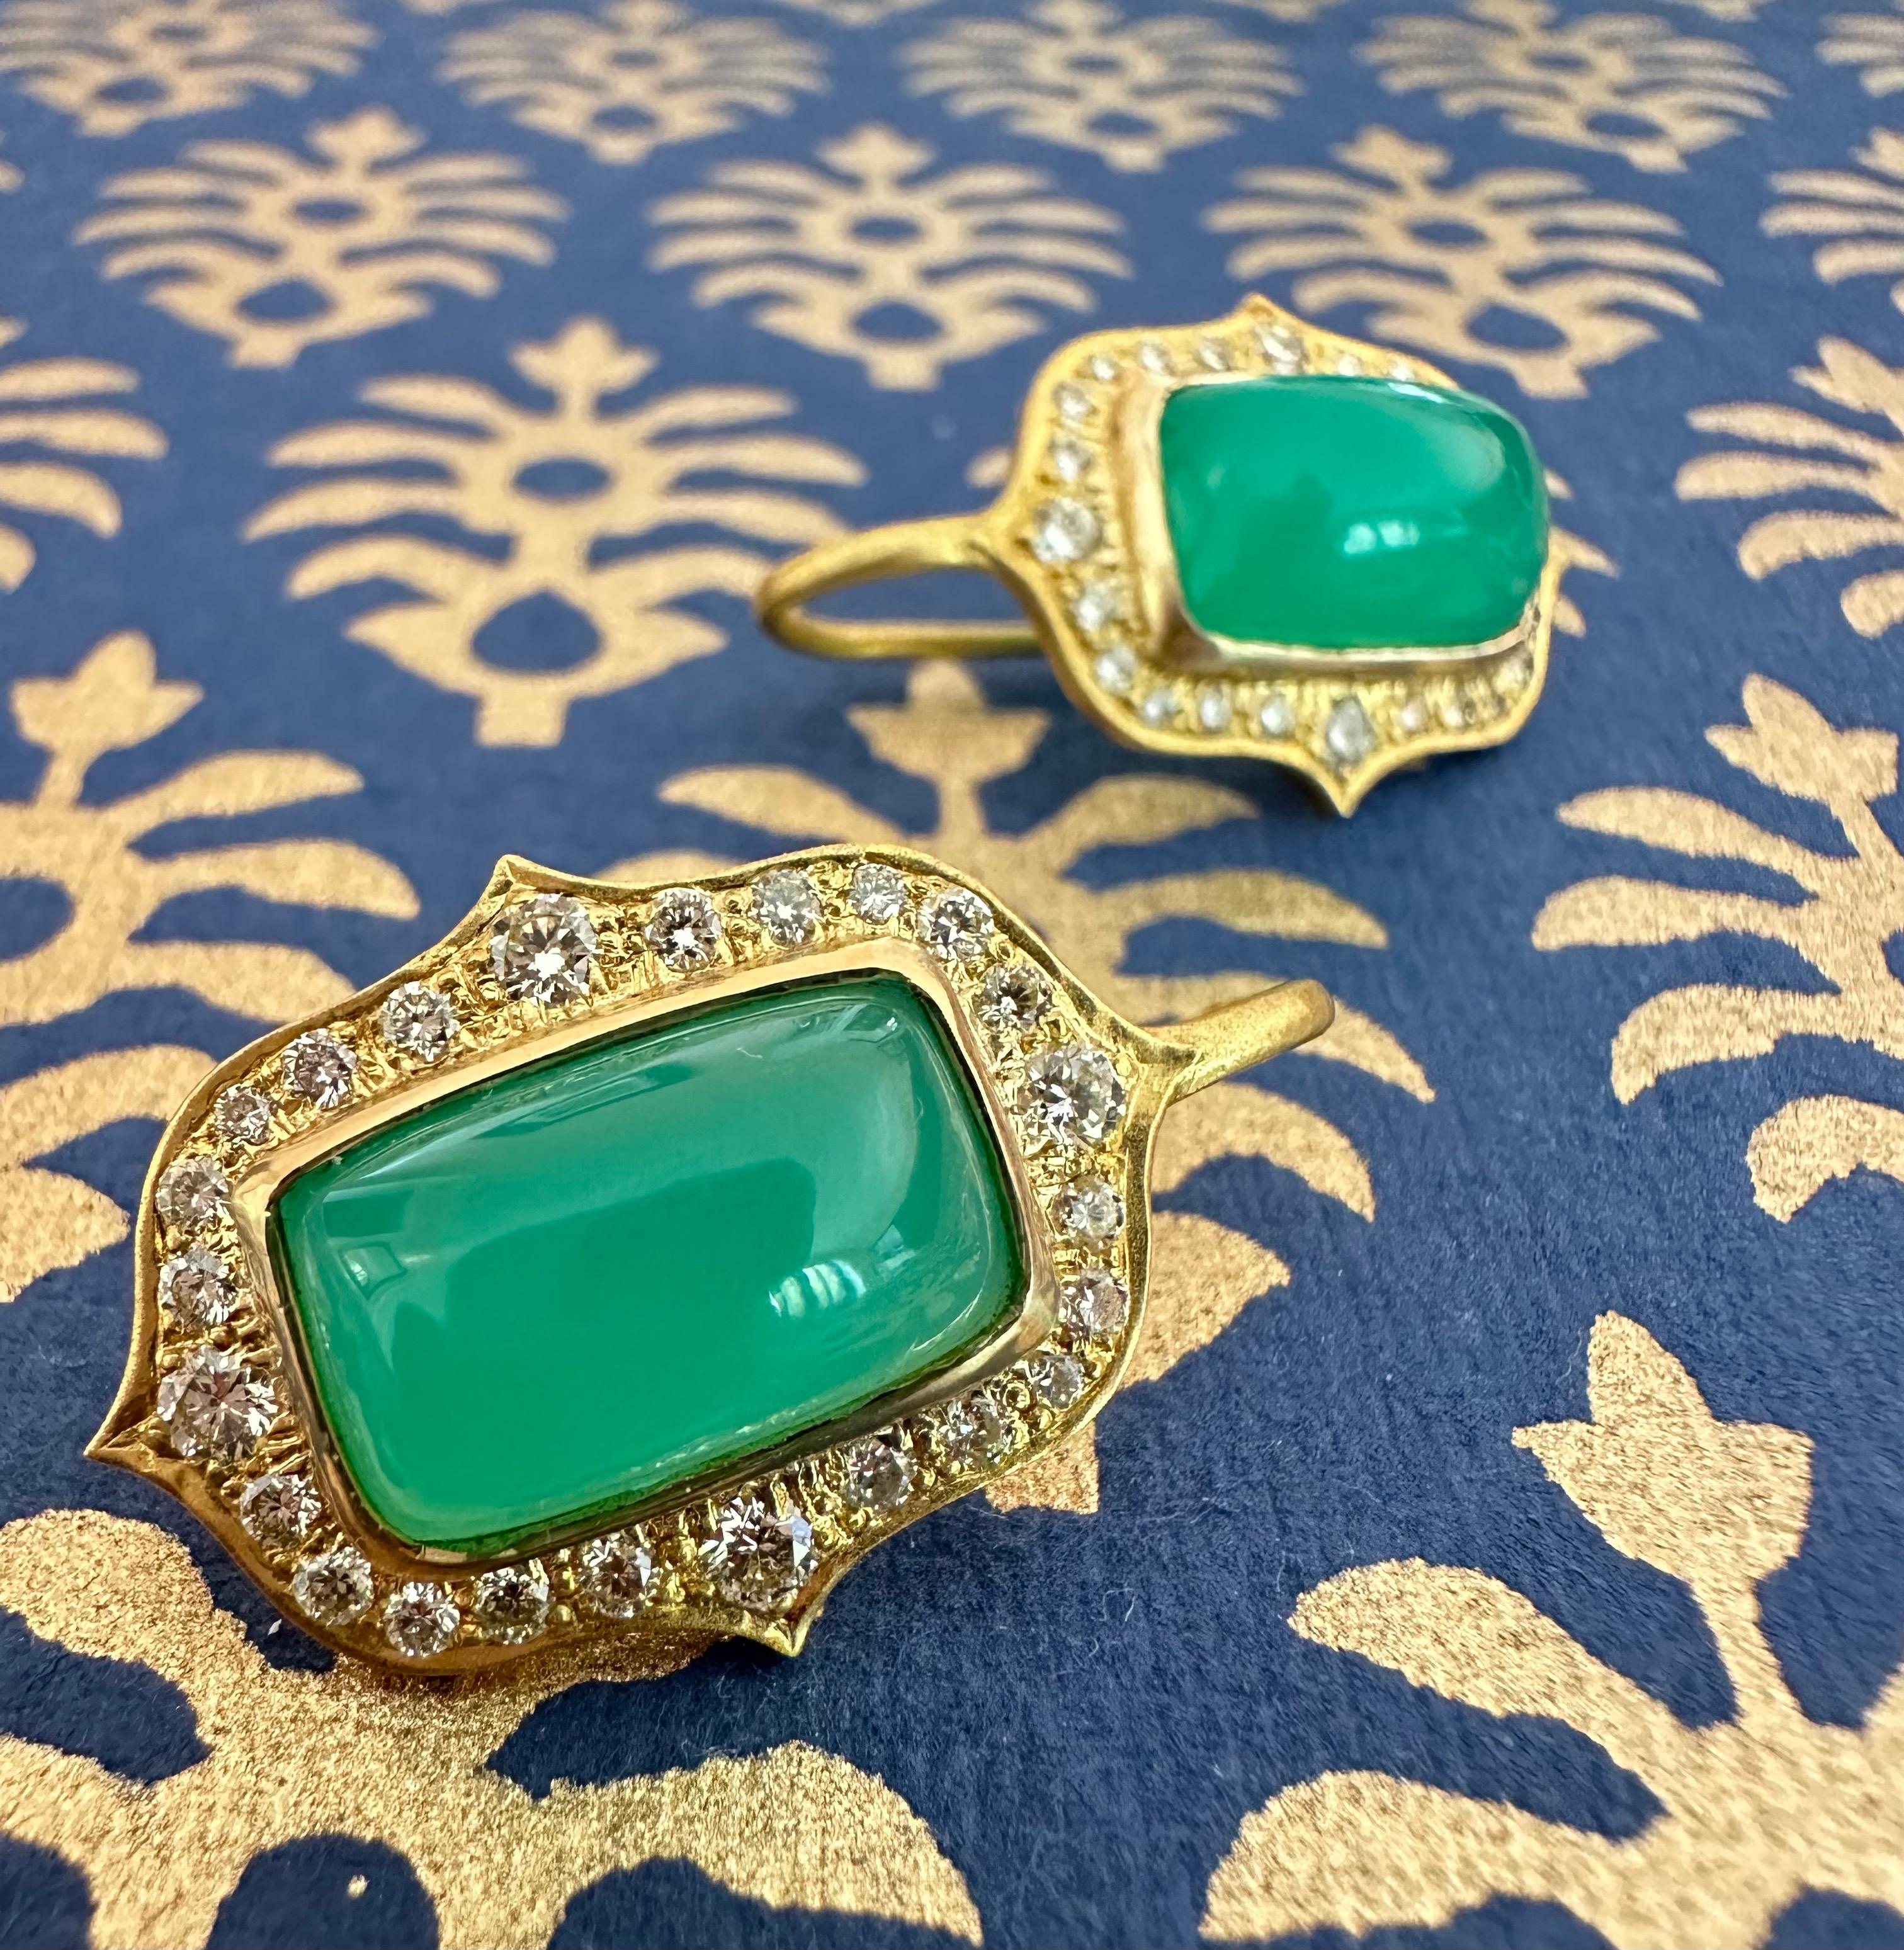 These Chrysoprase and .96ct White Diamond Earrings are truly WOW earrings that will not disappoint! Designed by award winning jewelry designer, Lauren Harper, the vibrant green cabochon center stones are surrounded by .96cts of intensely sparkly